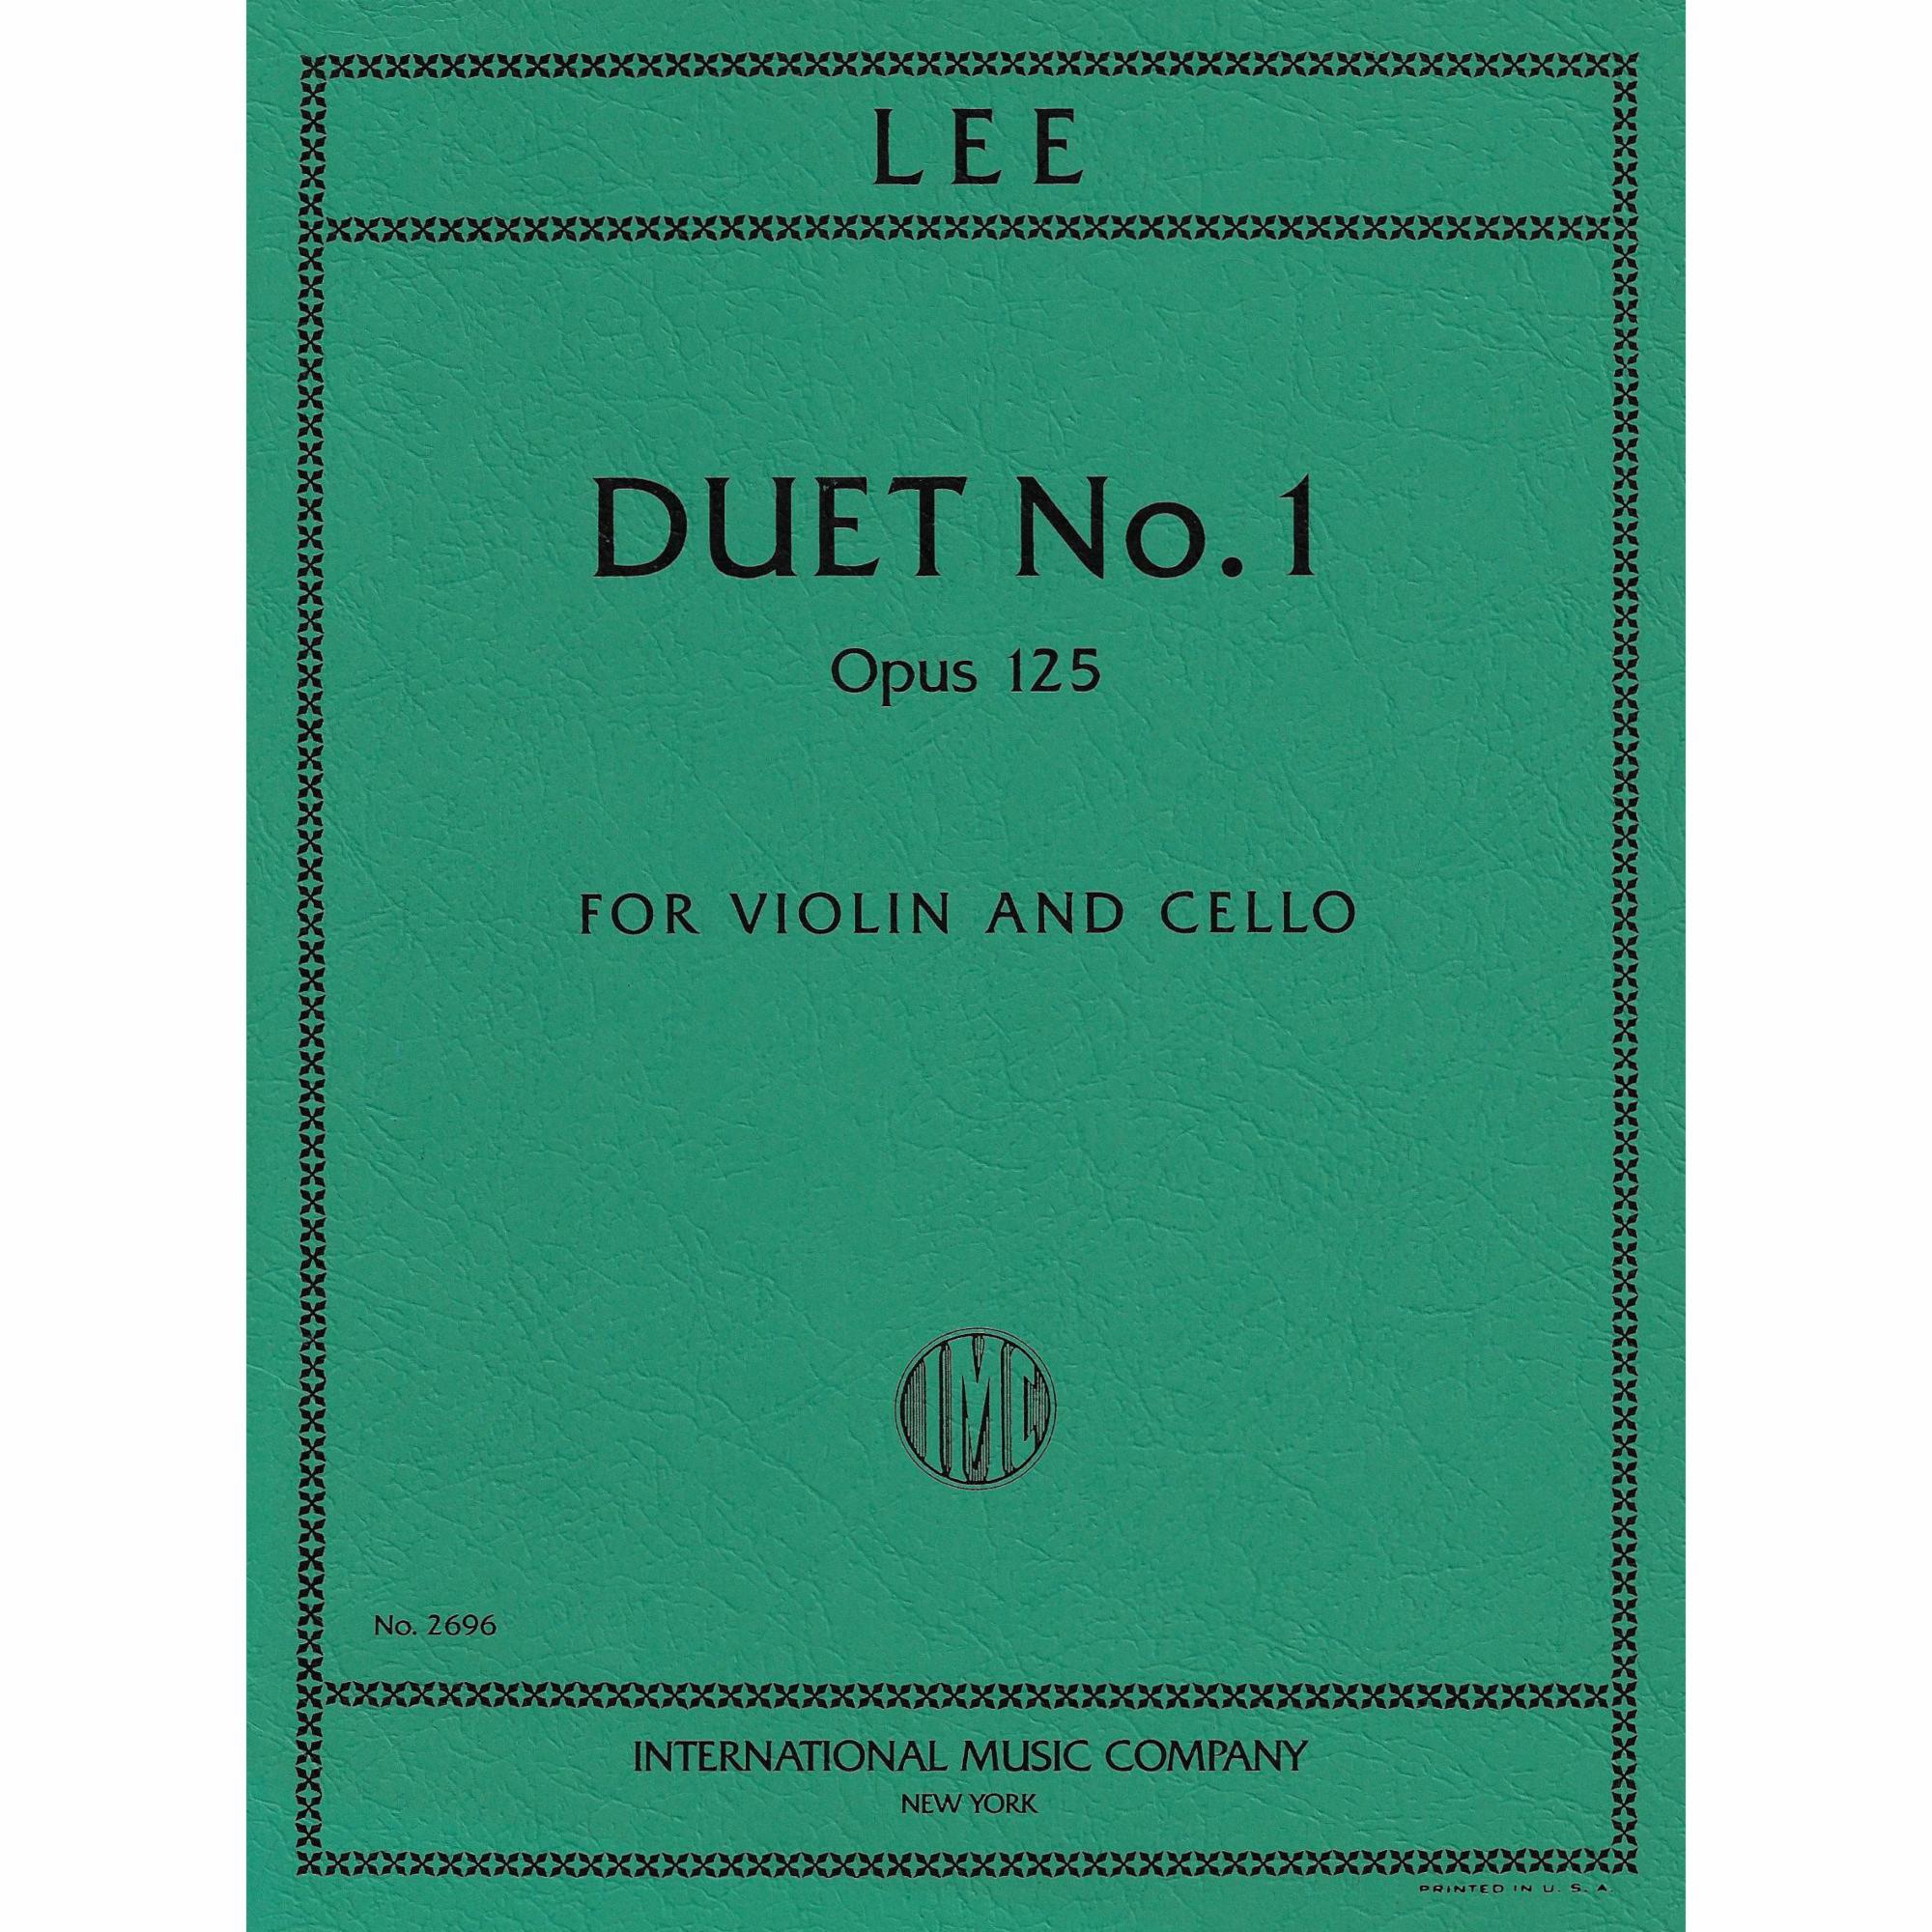 Lee -- Duet No. 1, Op. 125 for Violin and Cello